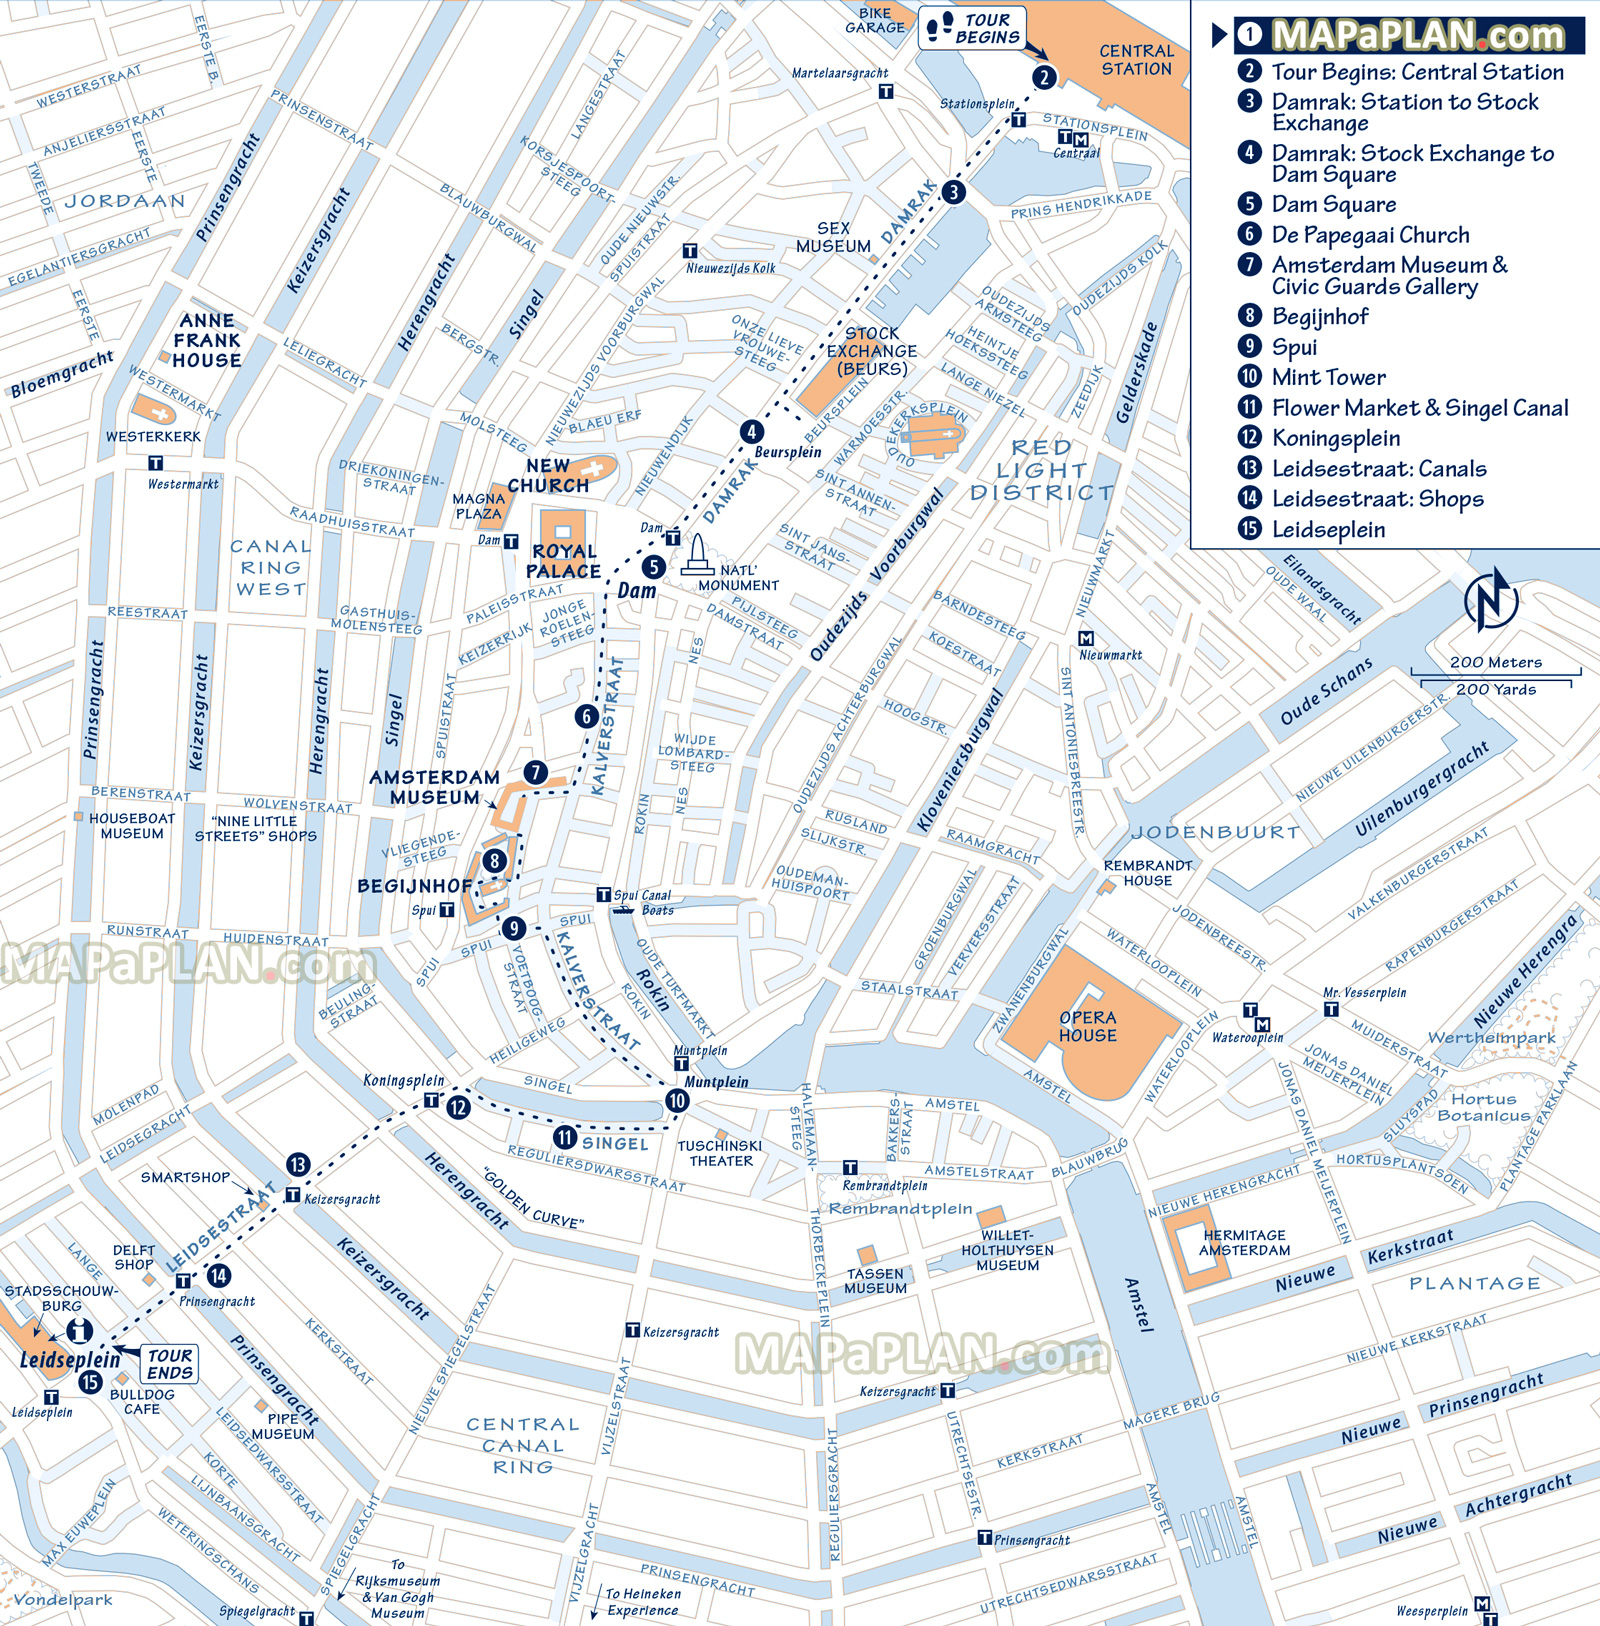 Walking tour itinerary Explore interesting sites buildings canals flower markets Amsterdam top tourist attractions map